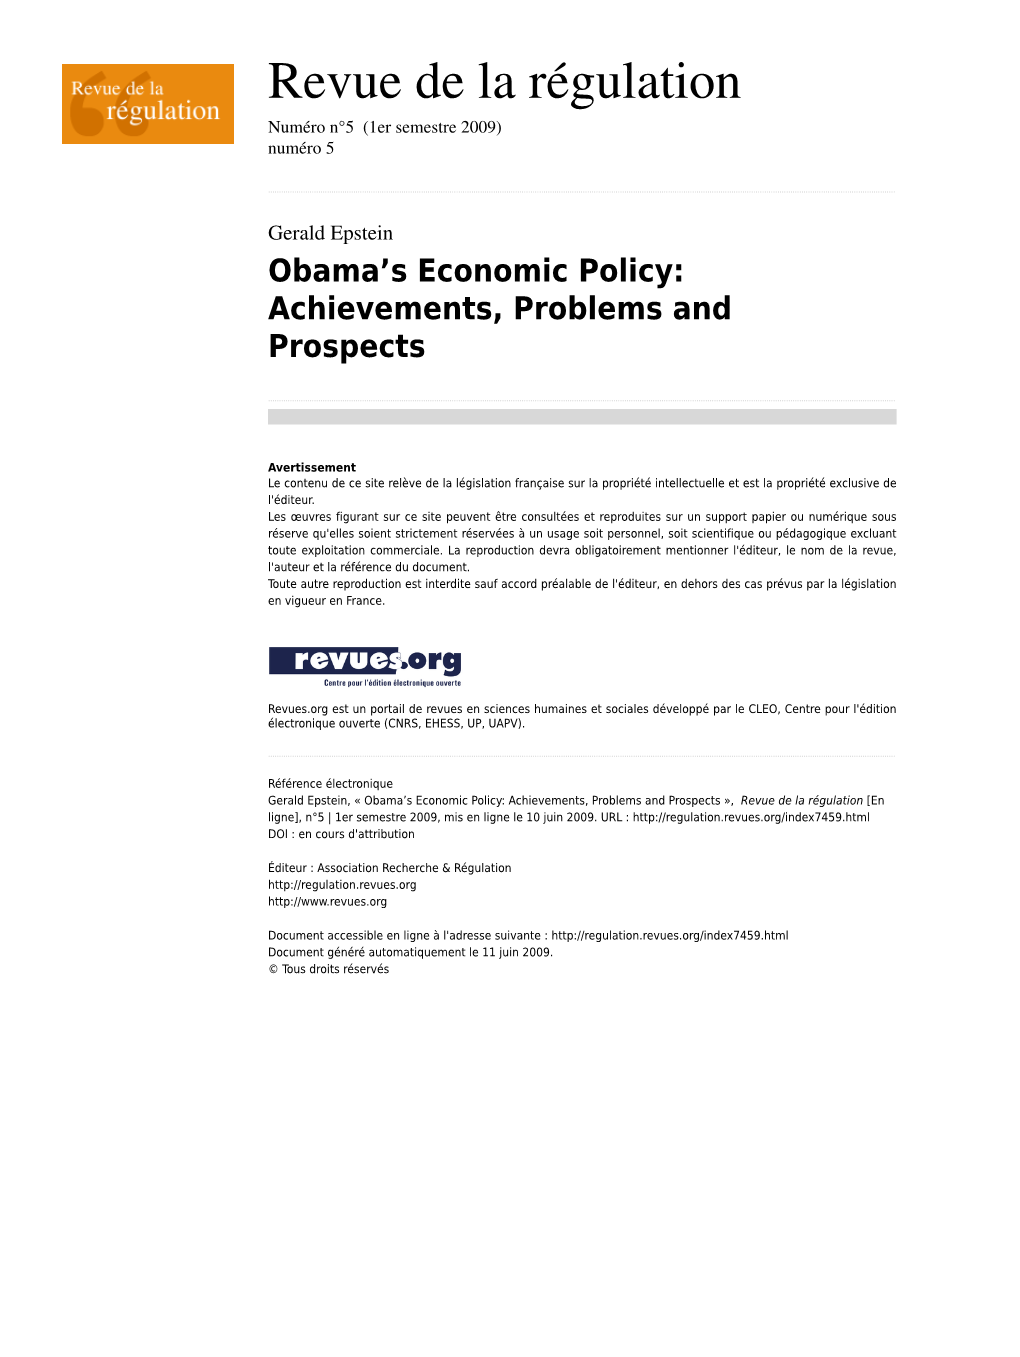 Obama's Economic Policy: Achievements, Problems And